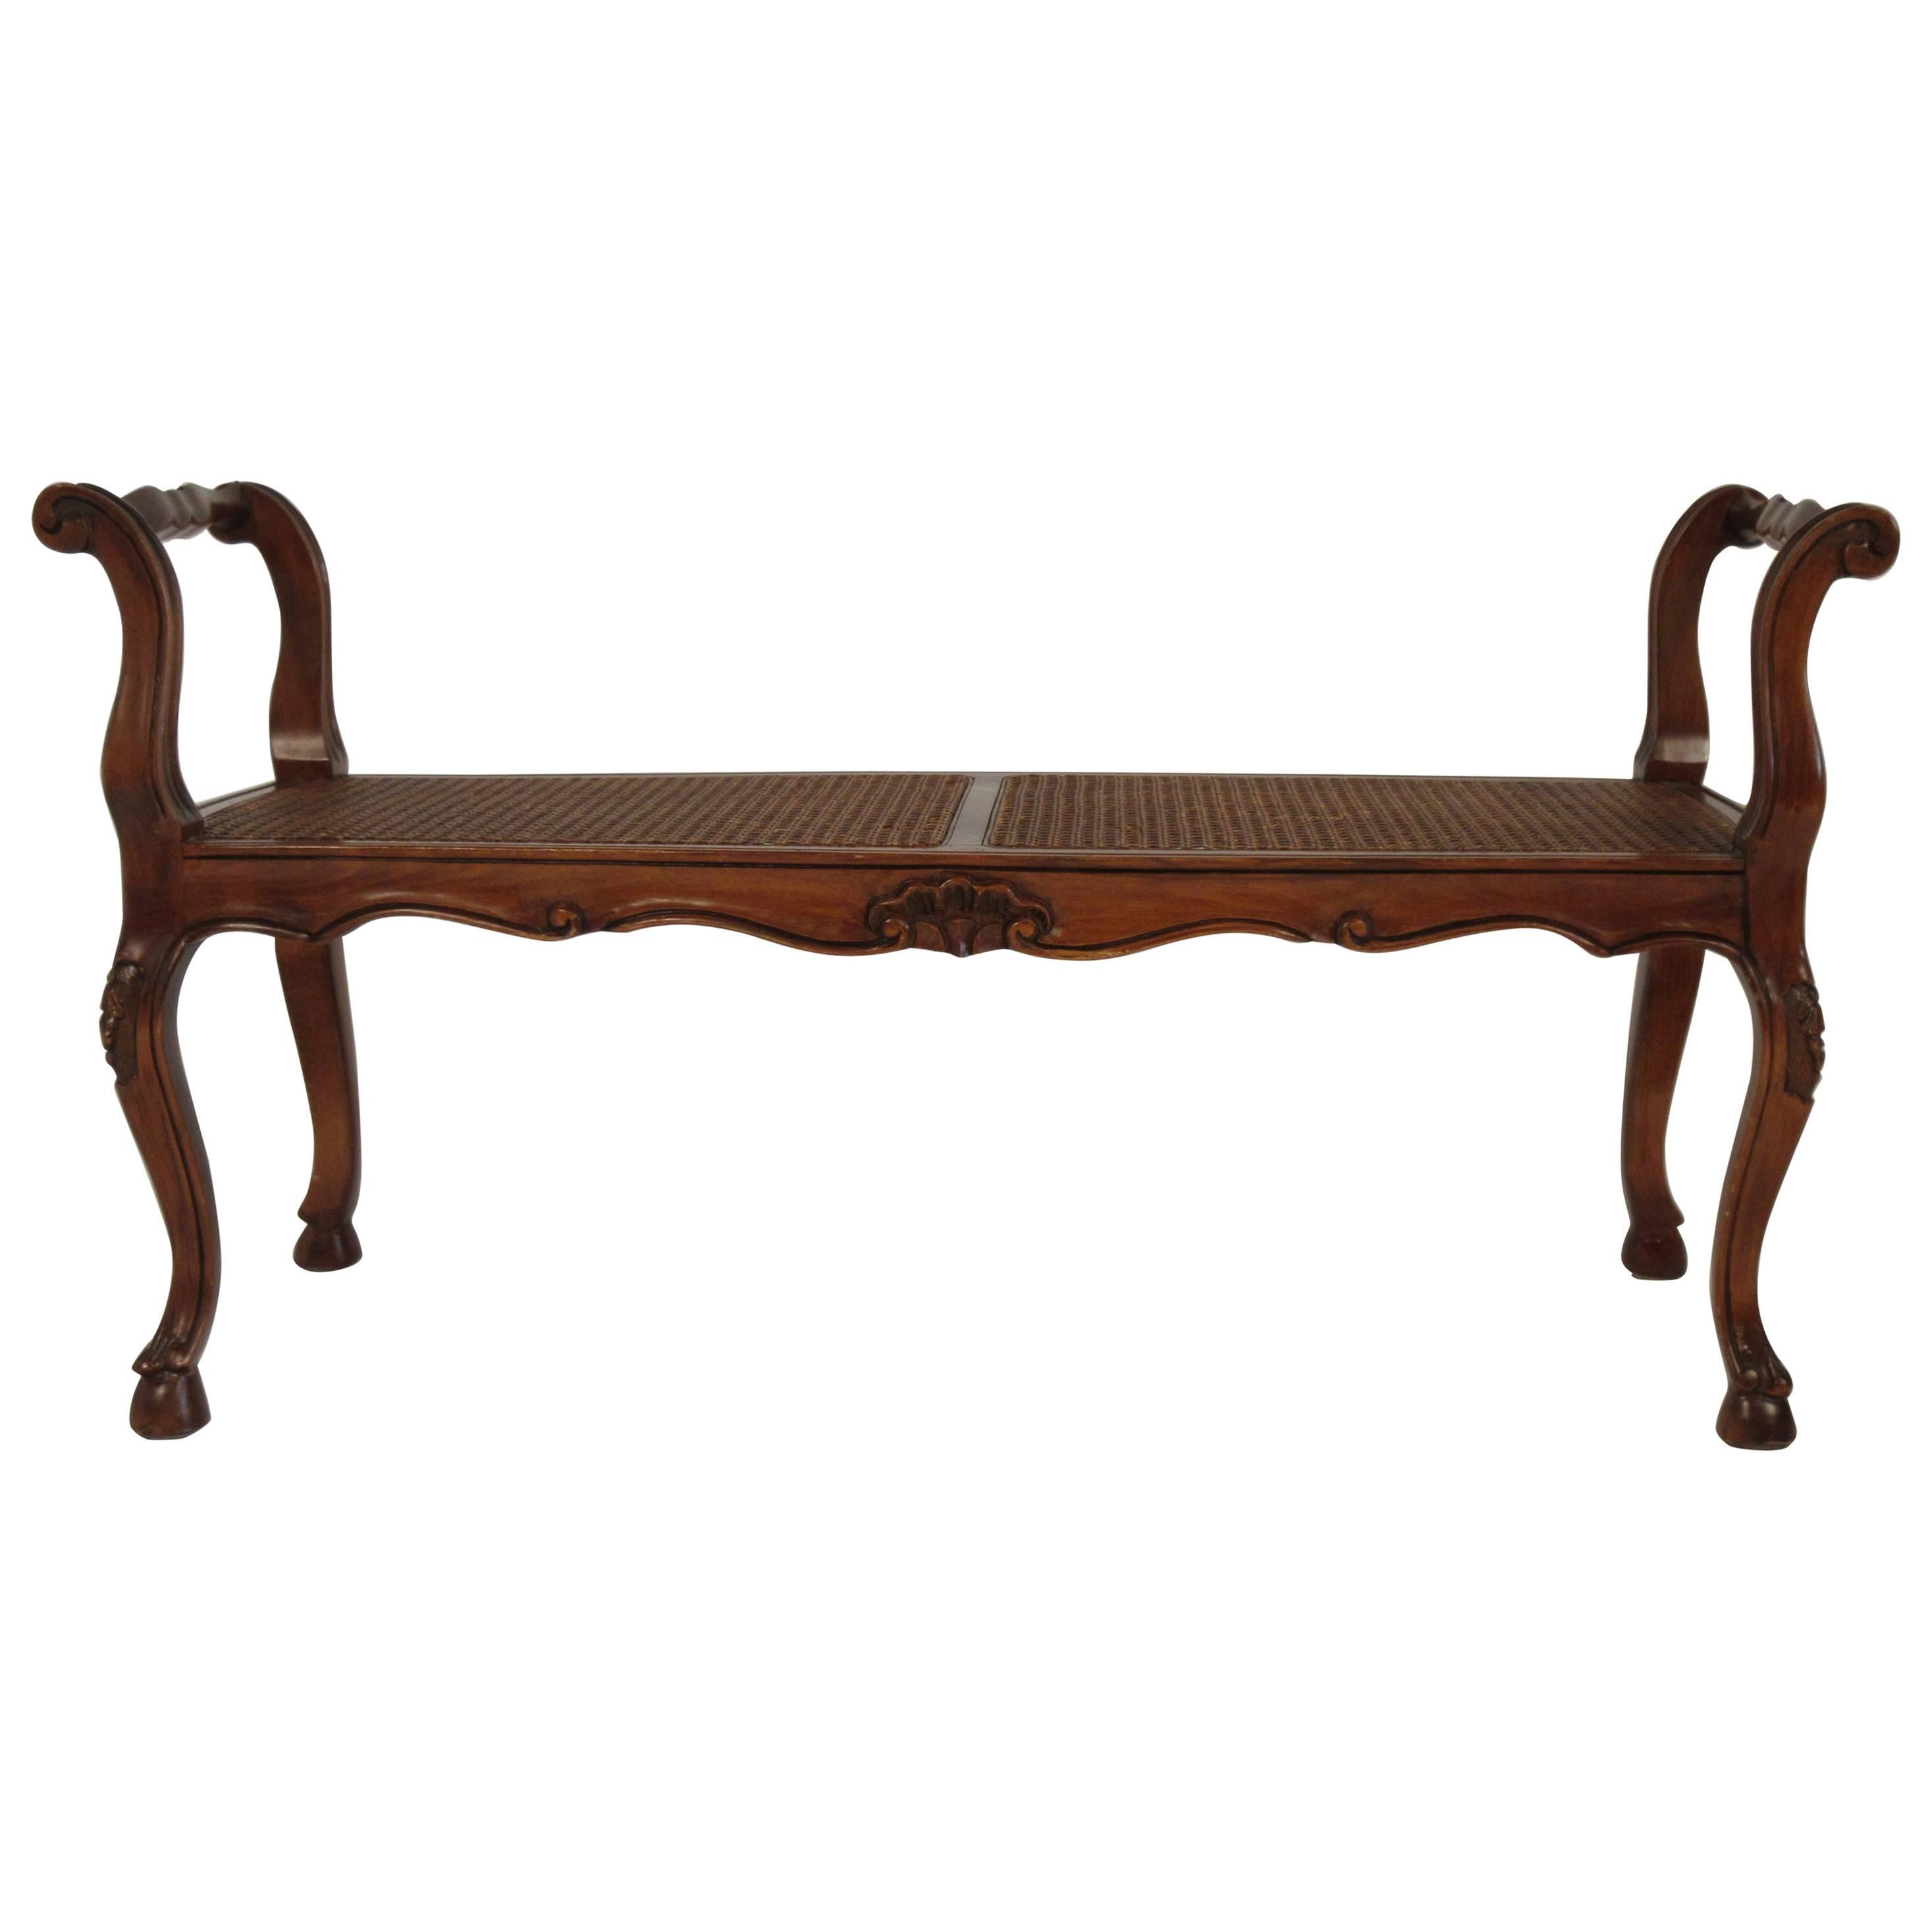 1950s French Style Carved Wooden Caned Bench